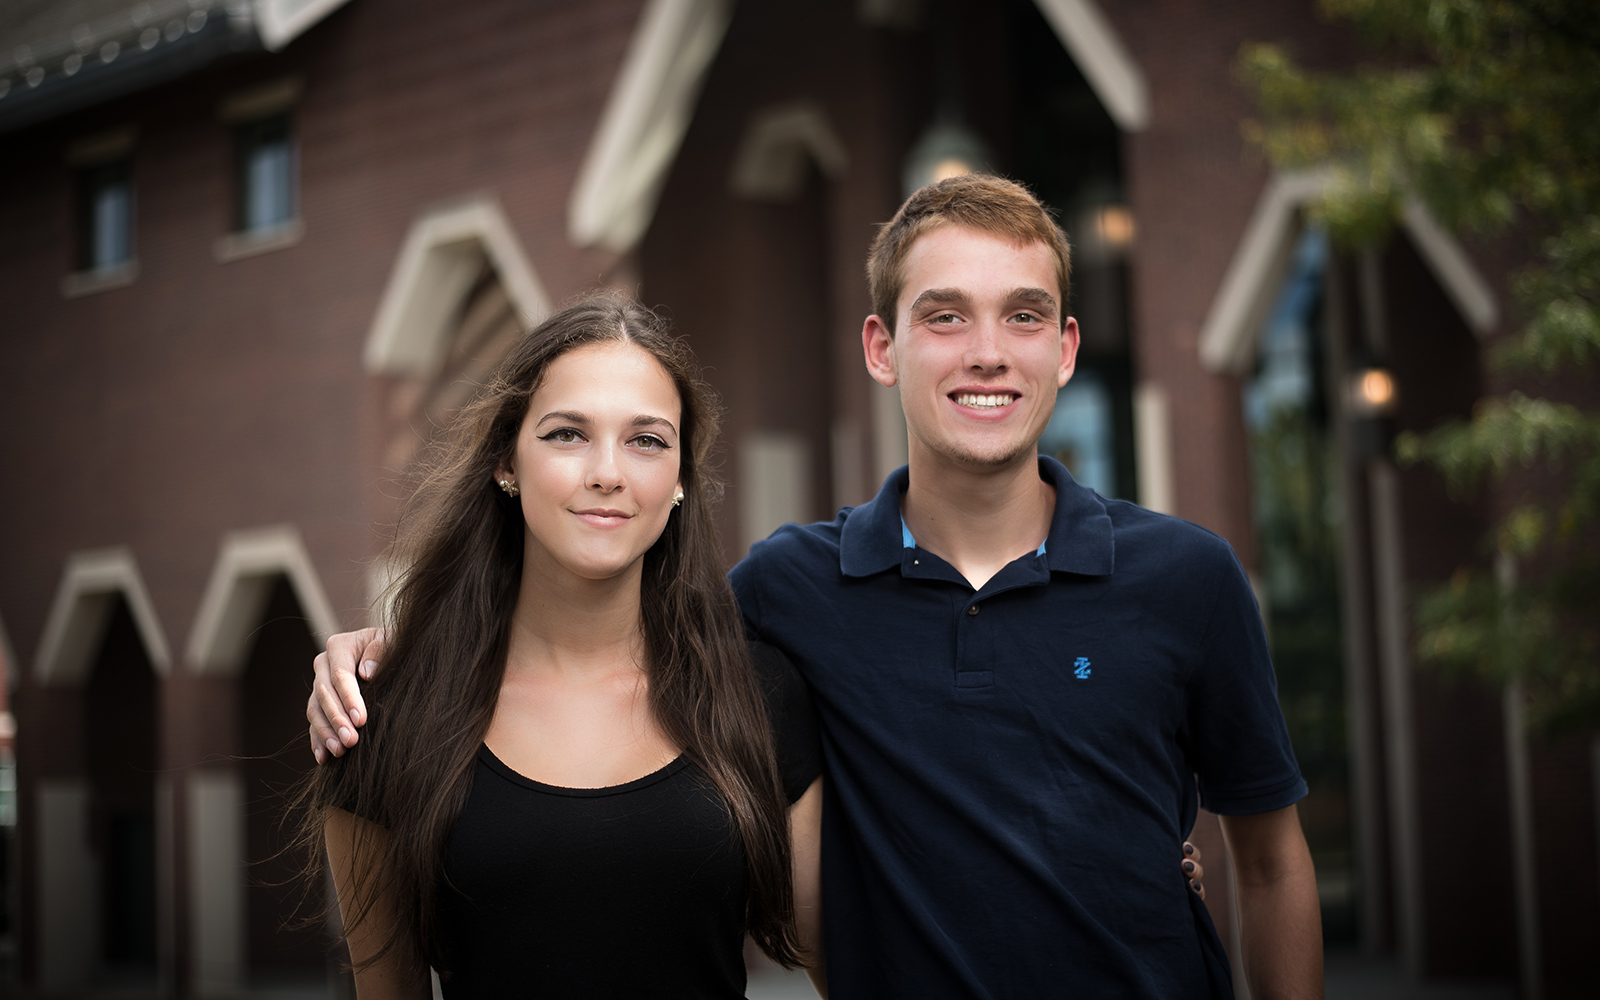 Julia Simics '20 (left) and William Simics '19 (right), of Shelton, were particularly mindful of the cost of college. As quadruplets, they knew that their parents would be paying four college tuition bills at once. They both selected UConn, while their siblings chose other state schools in Connecticut. (Nathan Oldham / UConn School of Business)